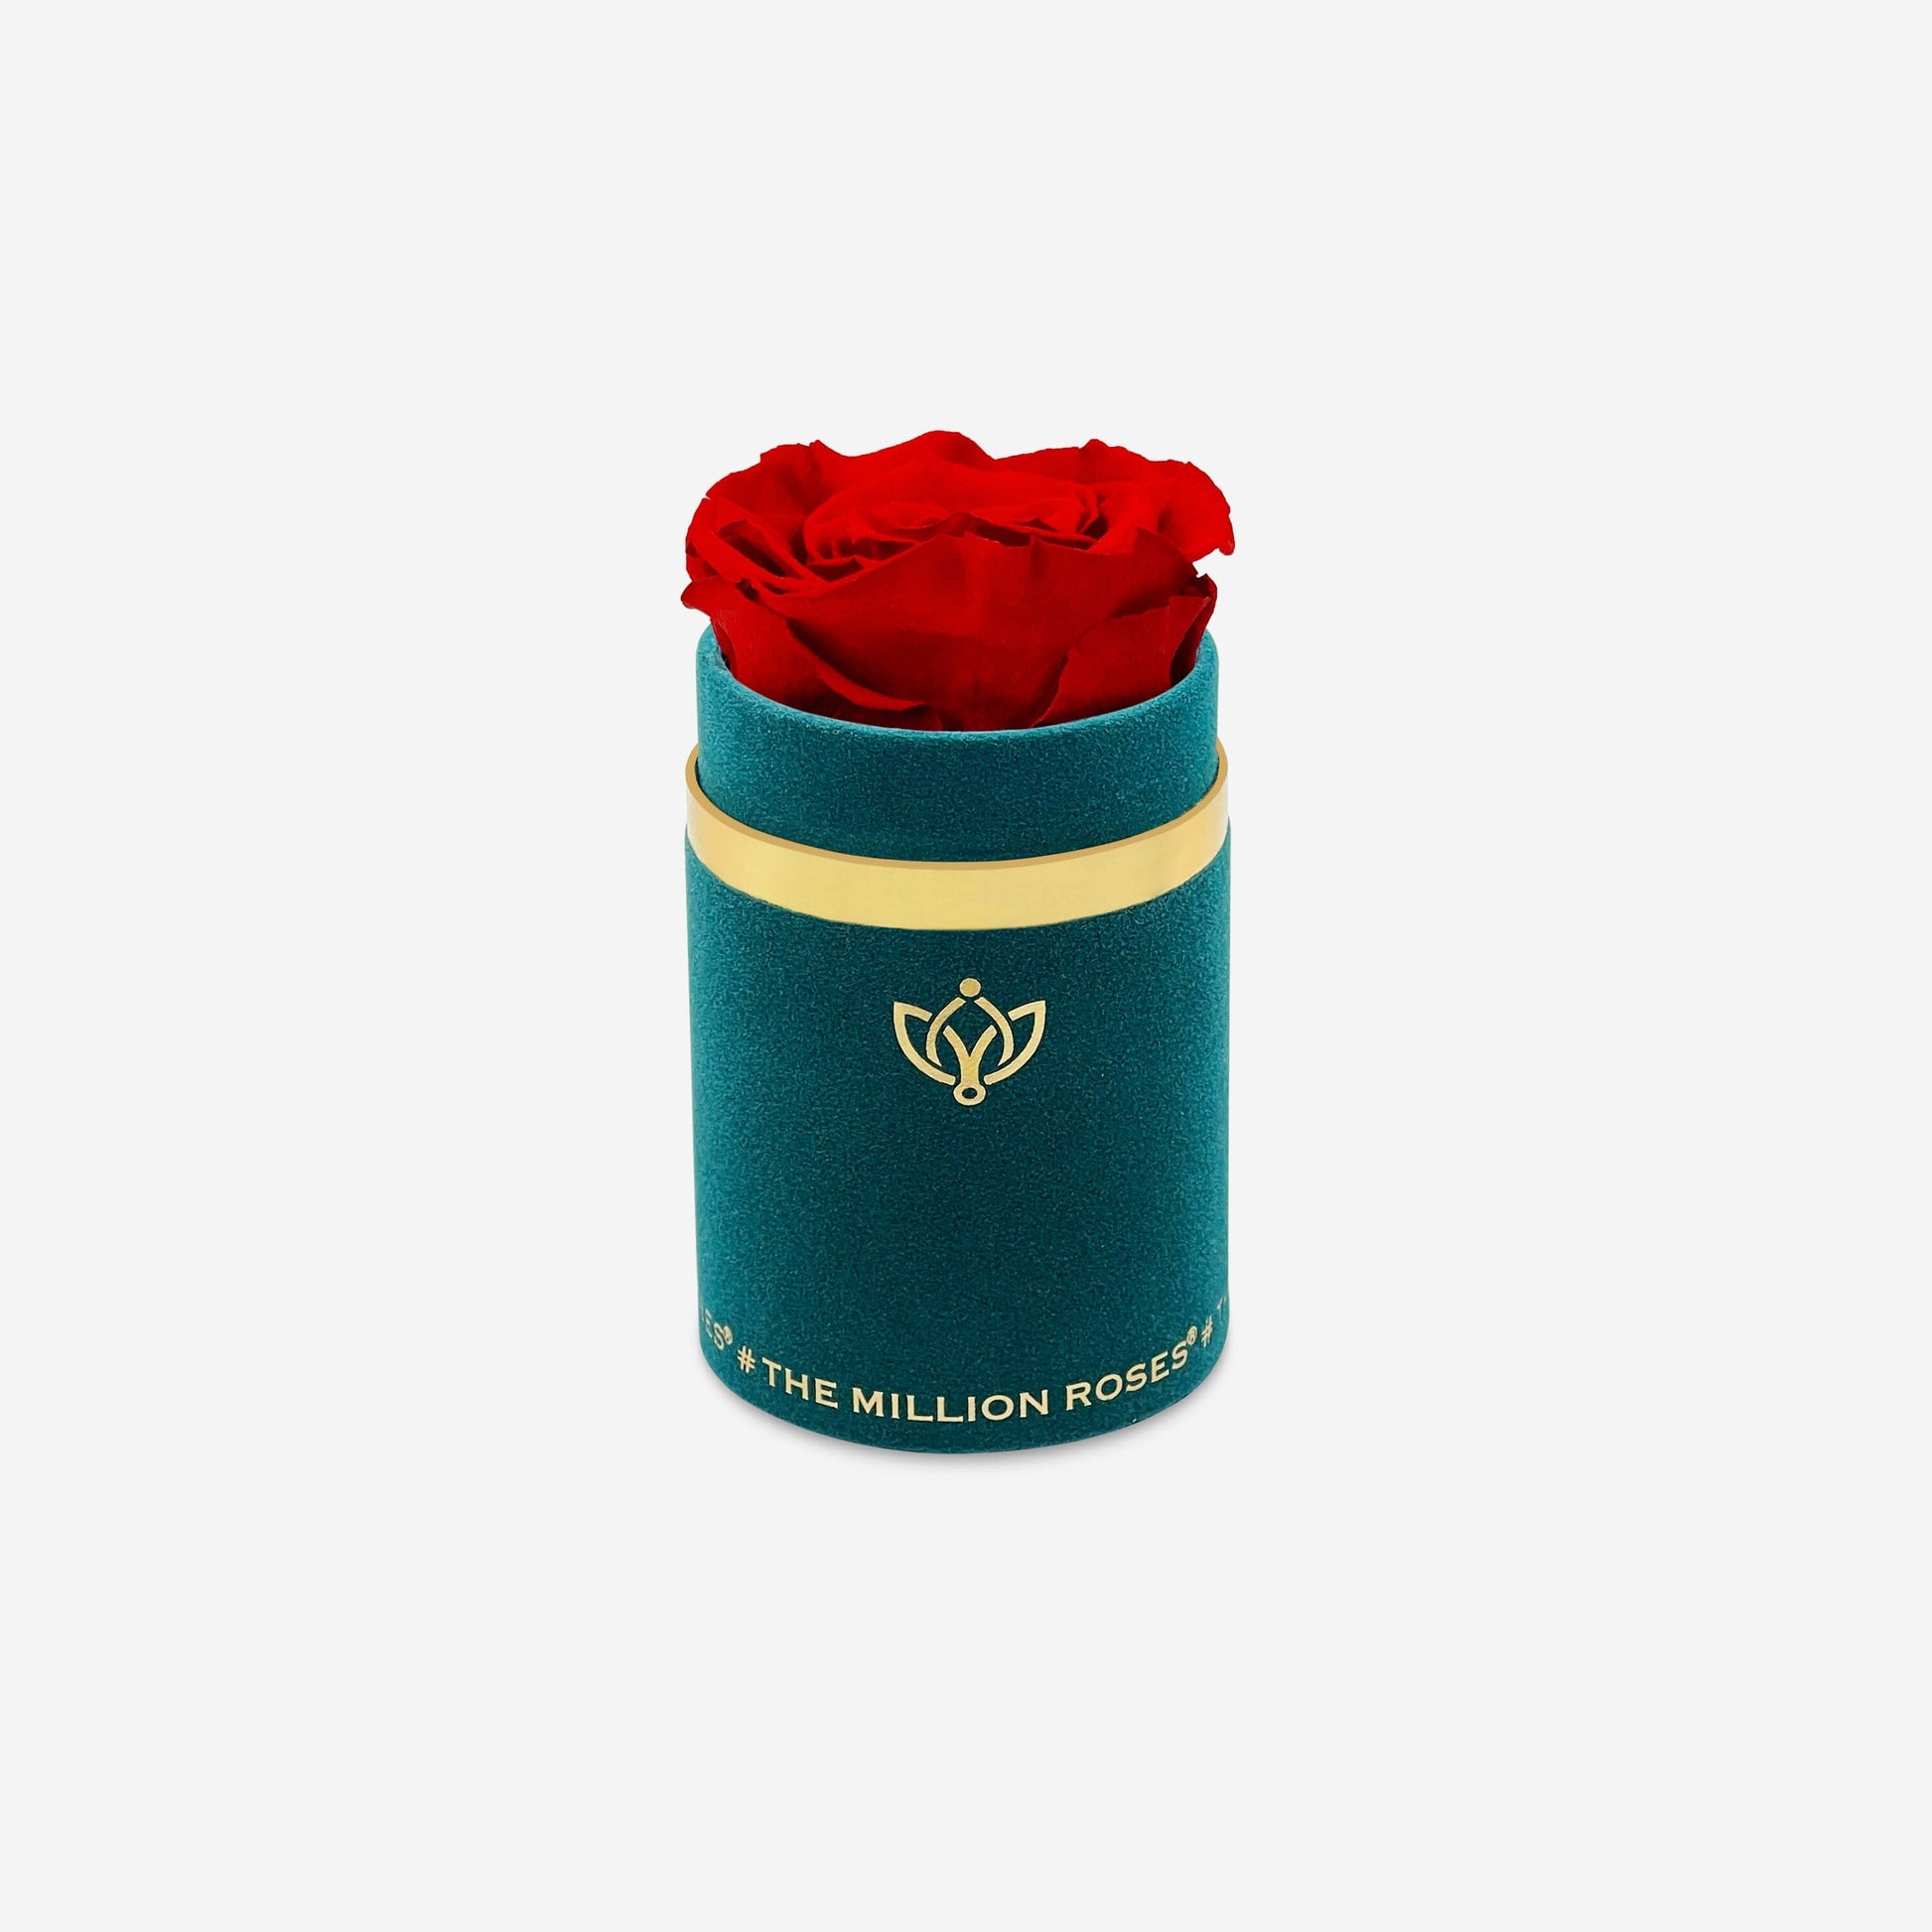 Single Dark Green Suede Box | Red Rose - The Million Roses